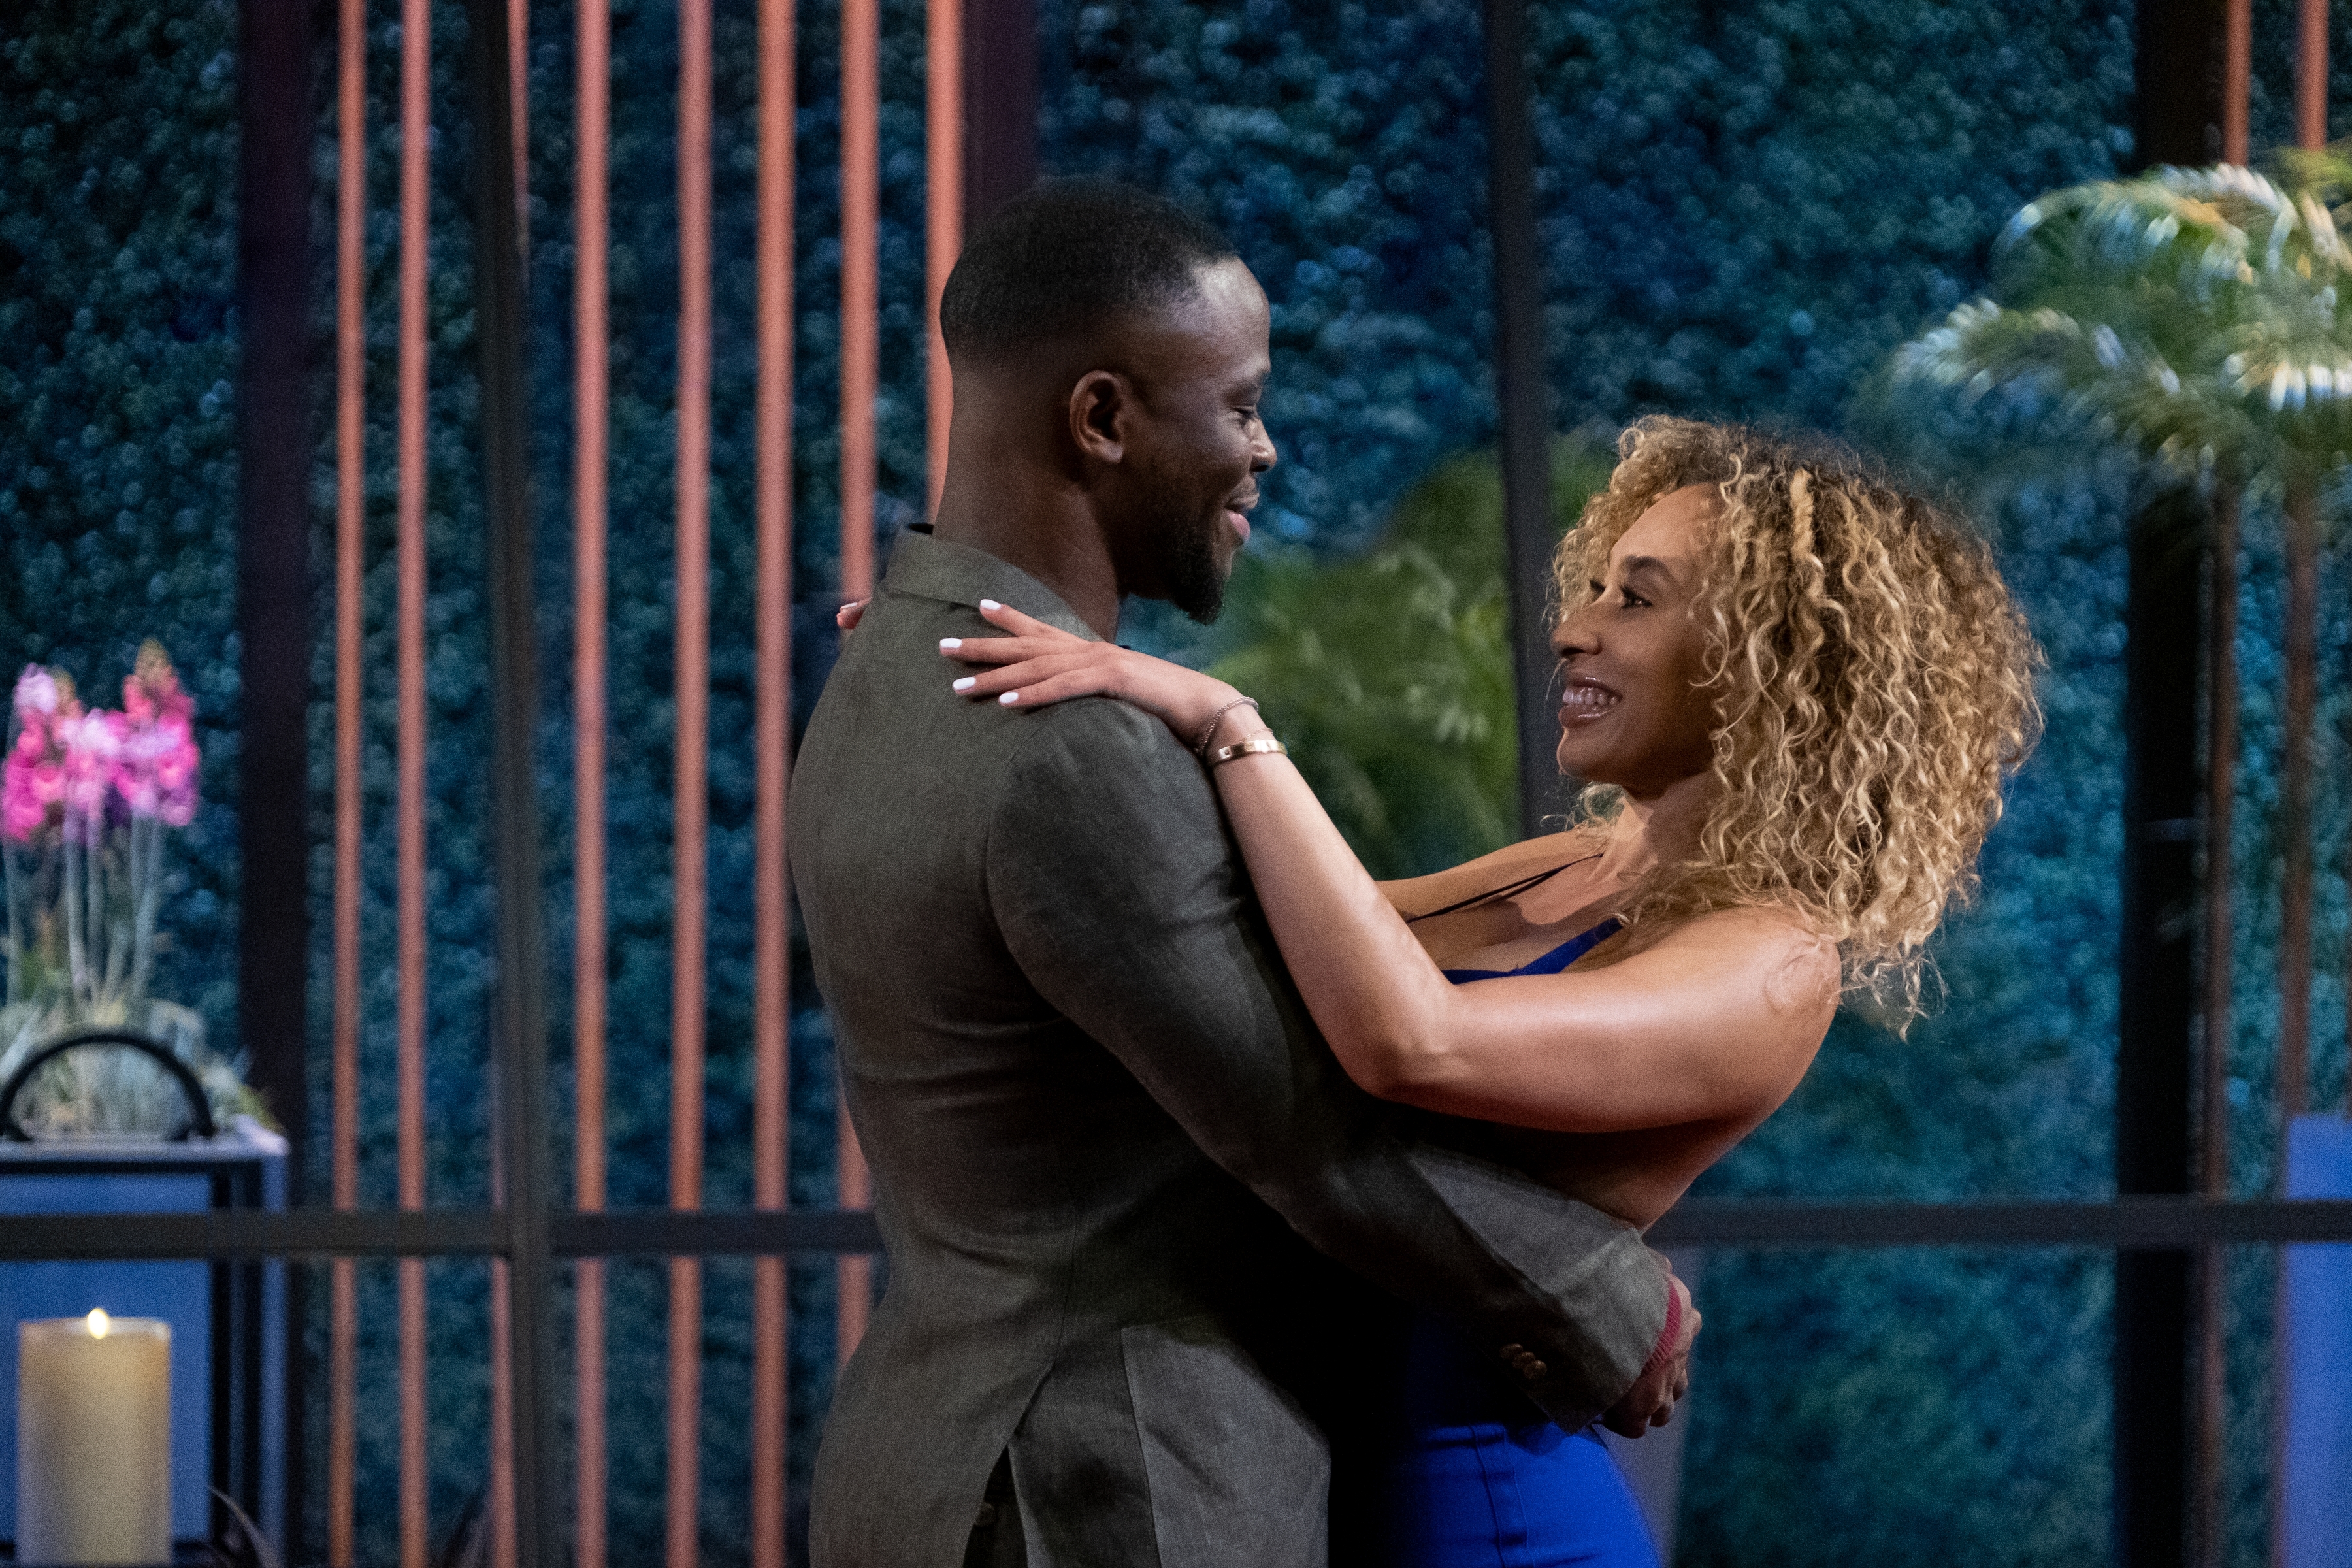 Love Is Blind': What Happened to the Season 3 Couples